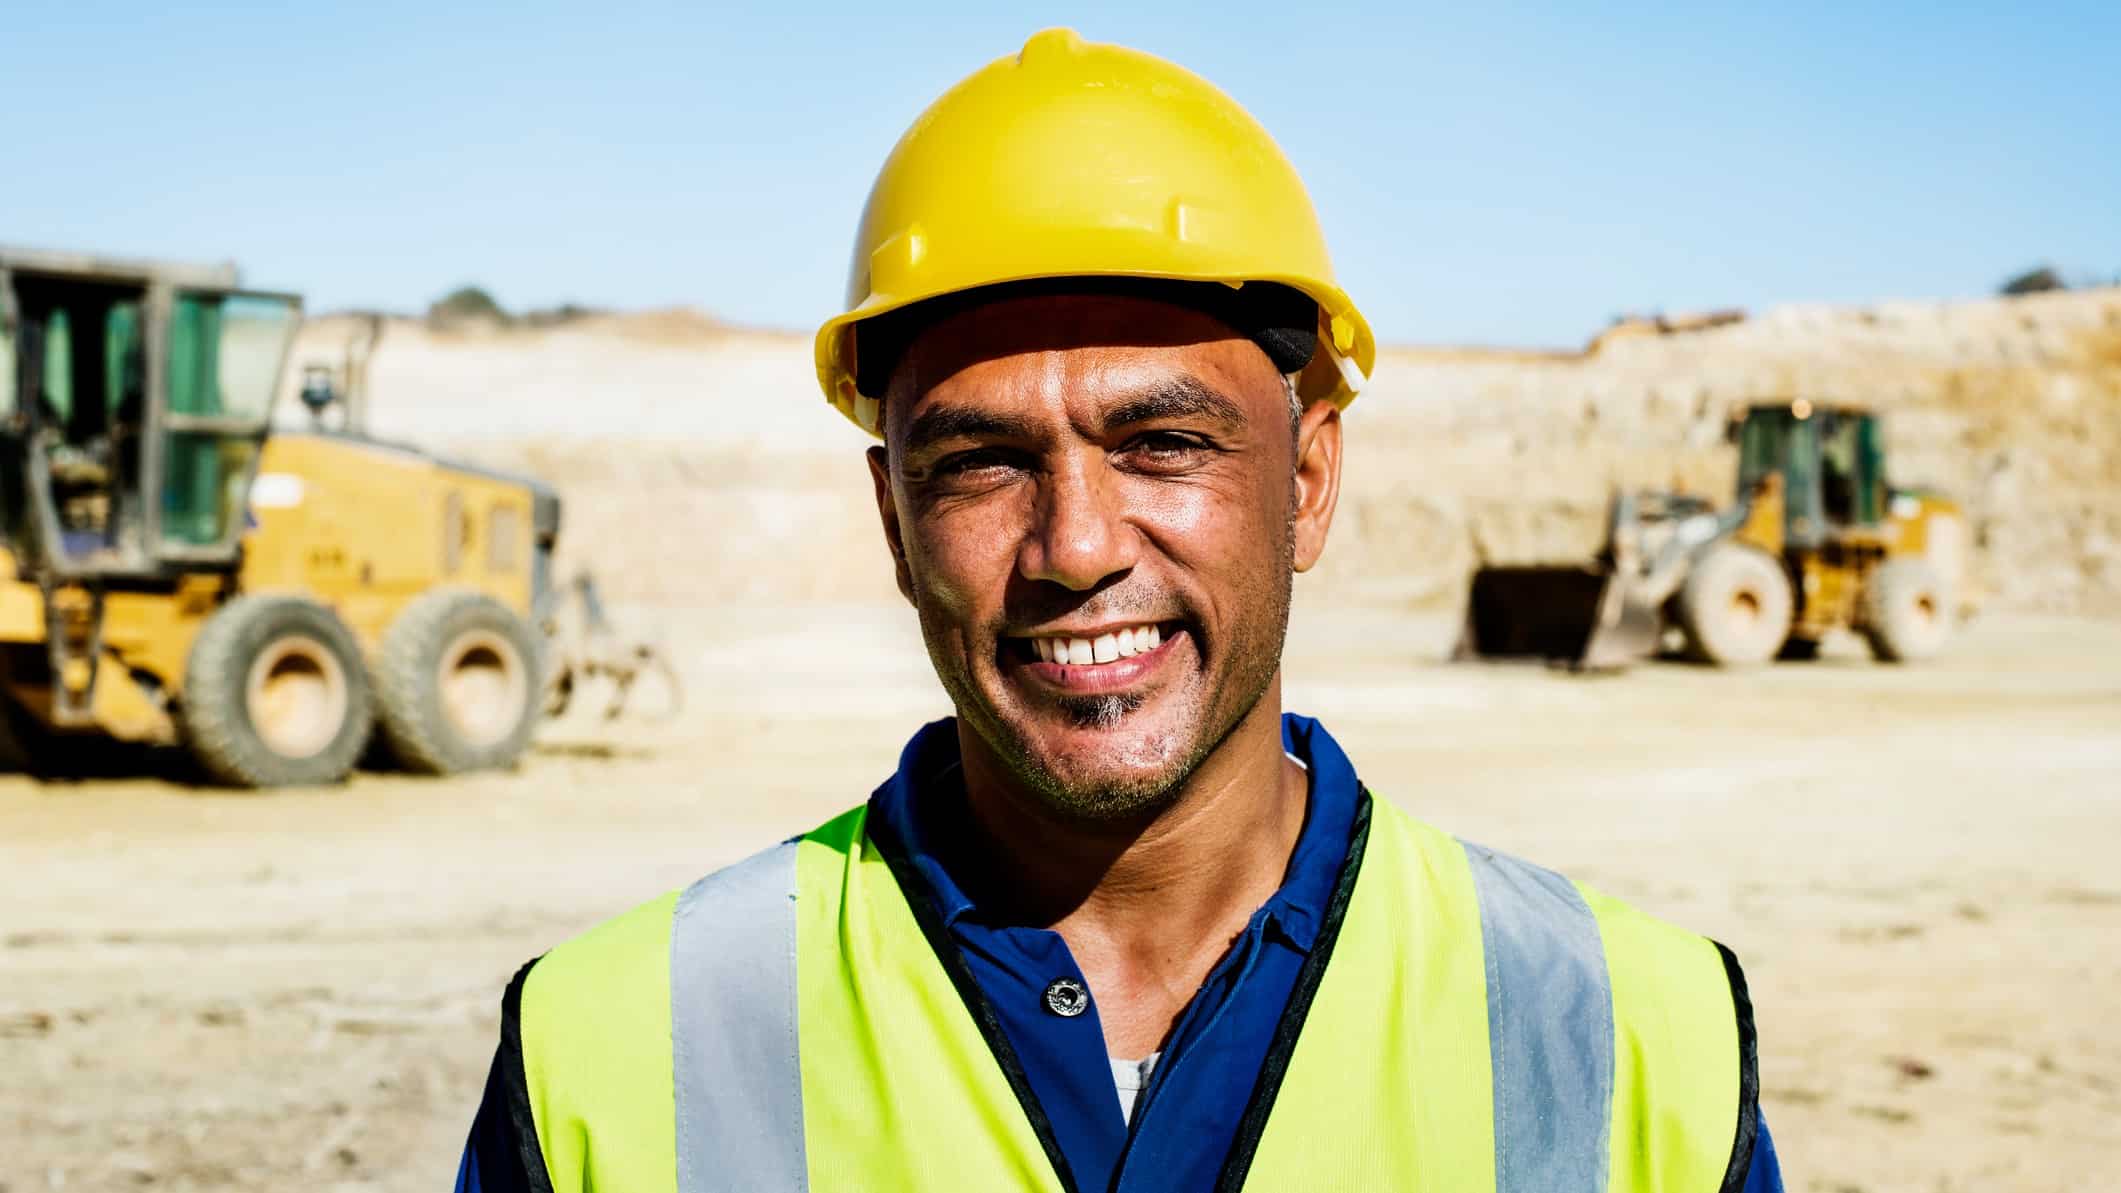 a miner wearing a hard hat smiles as he stands in front of heavy earth moving equipment on a barren mine site.